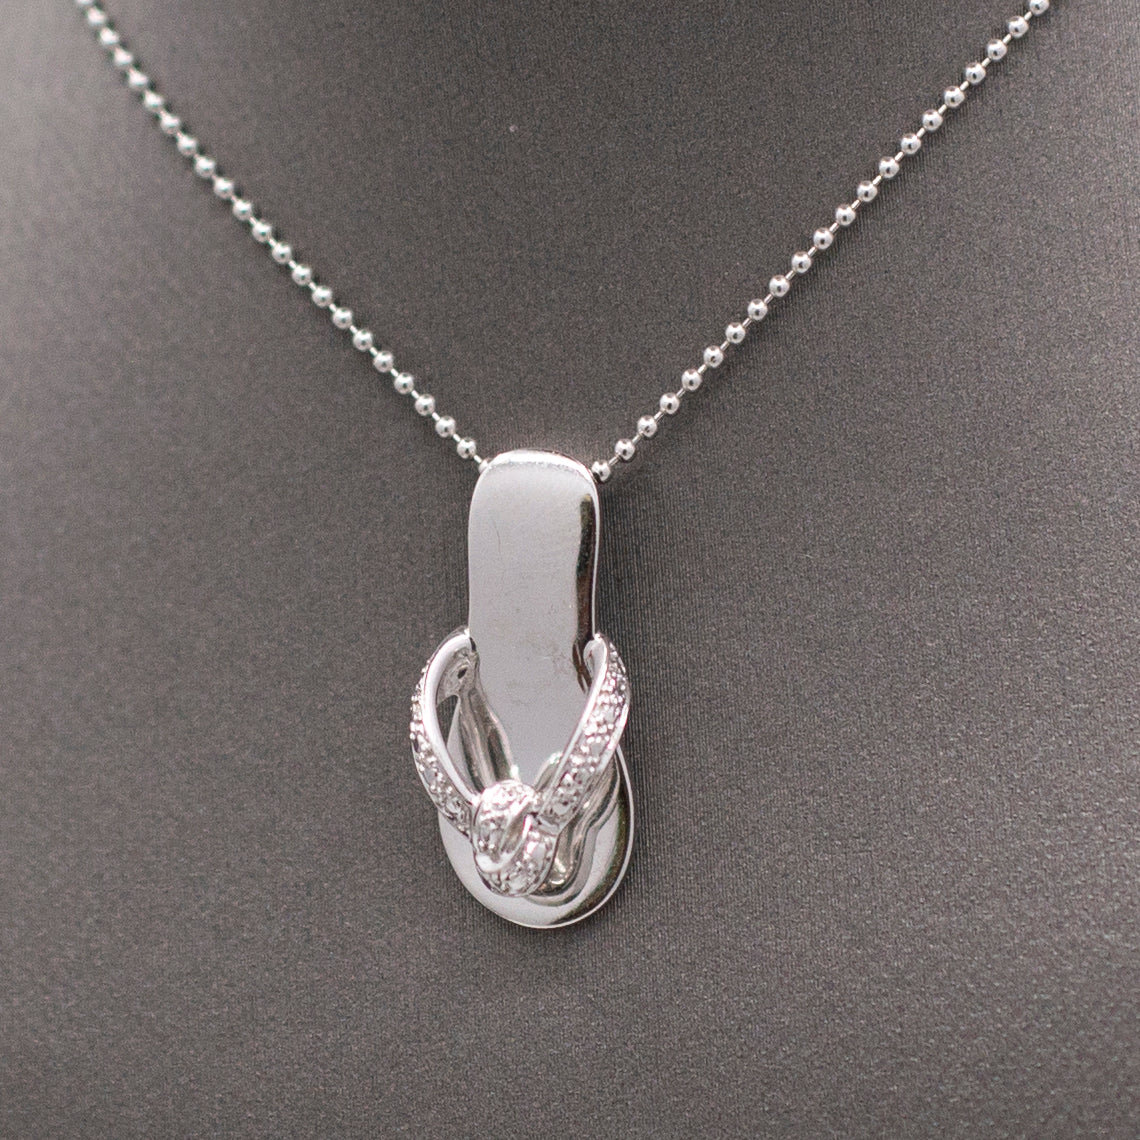 Classic Hawaiian Flip Flop Sandal Pendant Charm Necklace in 14k White Gold